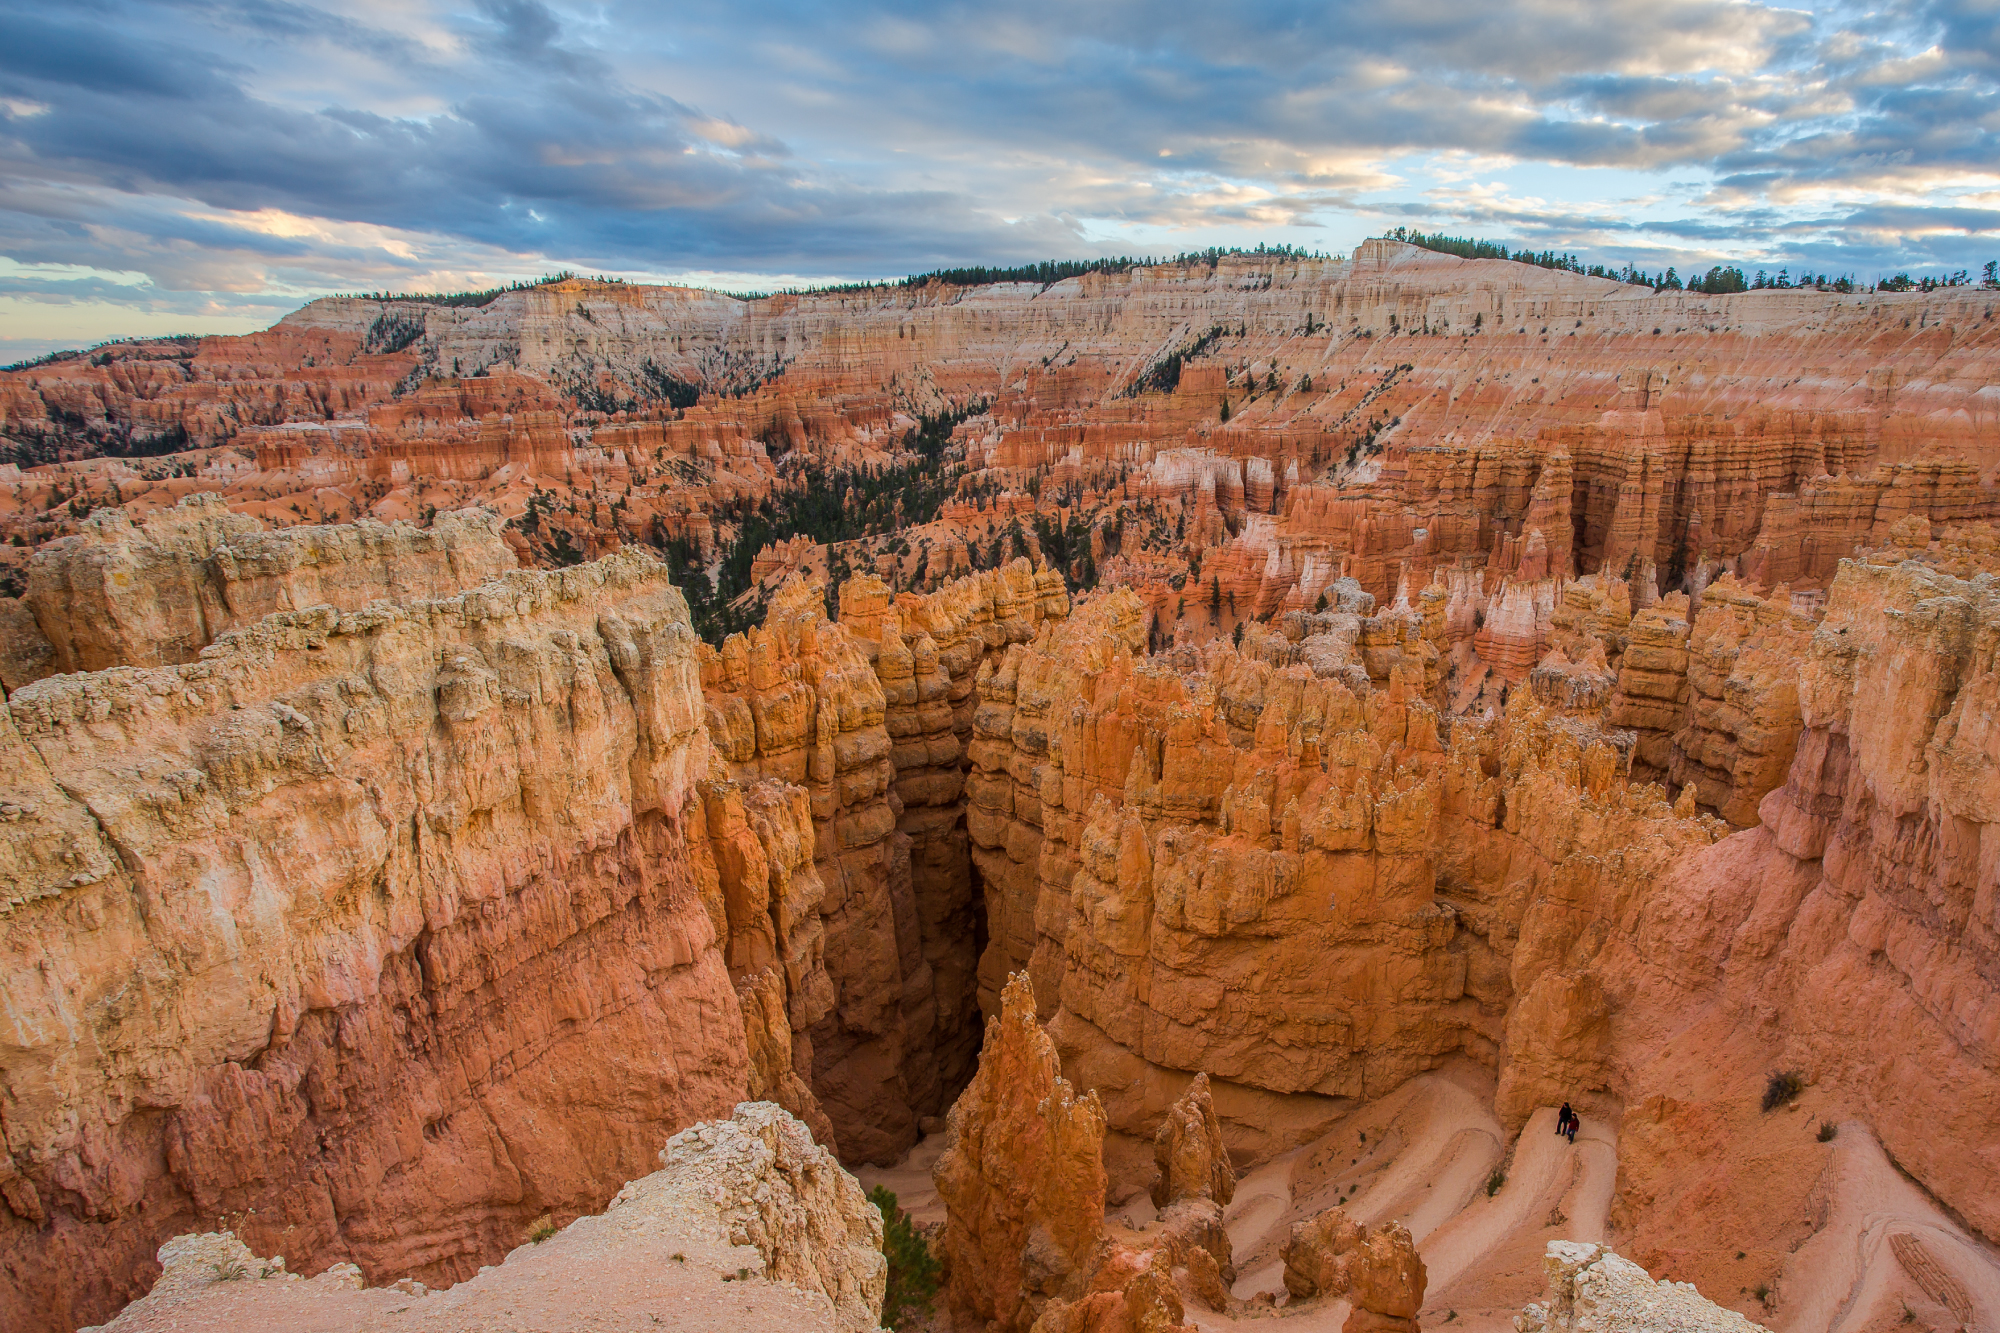 HDR Photography Workshop: Bryce Canyon HDR | Pt.5 | Photoshop Layer Blending